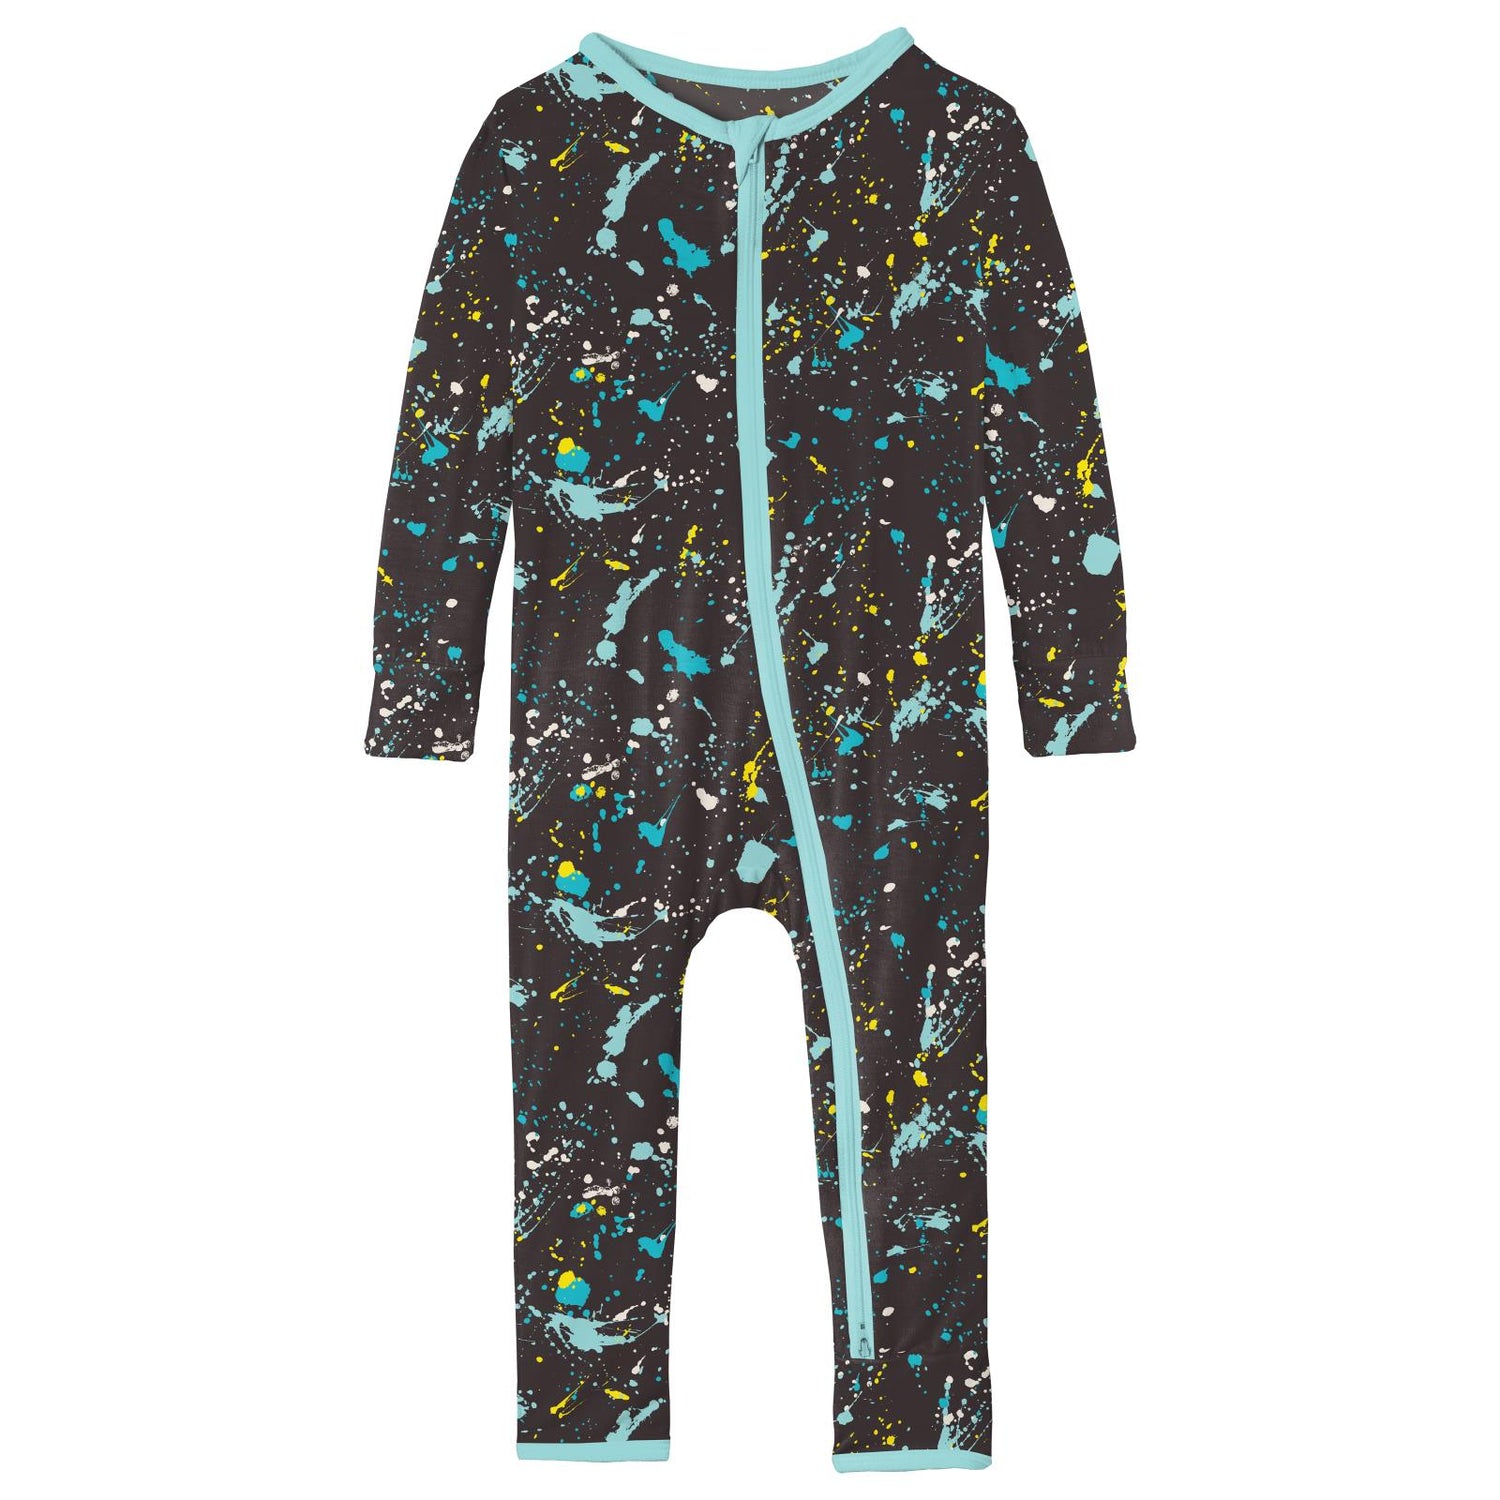 Print Coverall with 2 Way Zipper in Confetti Splatter Paint